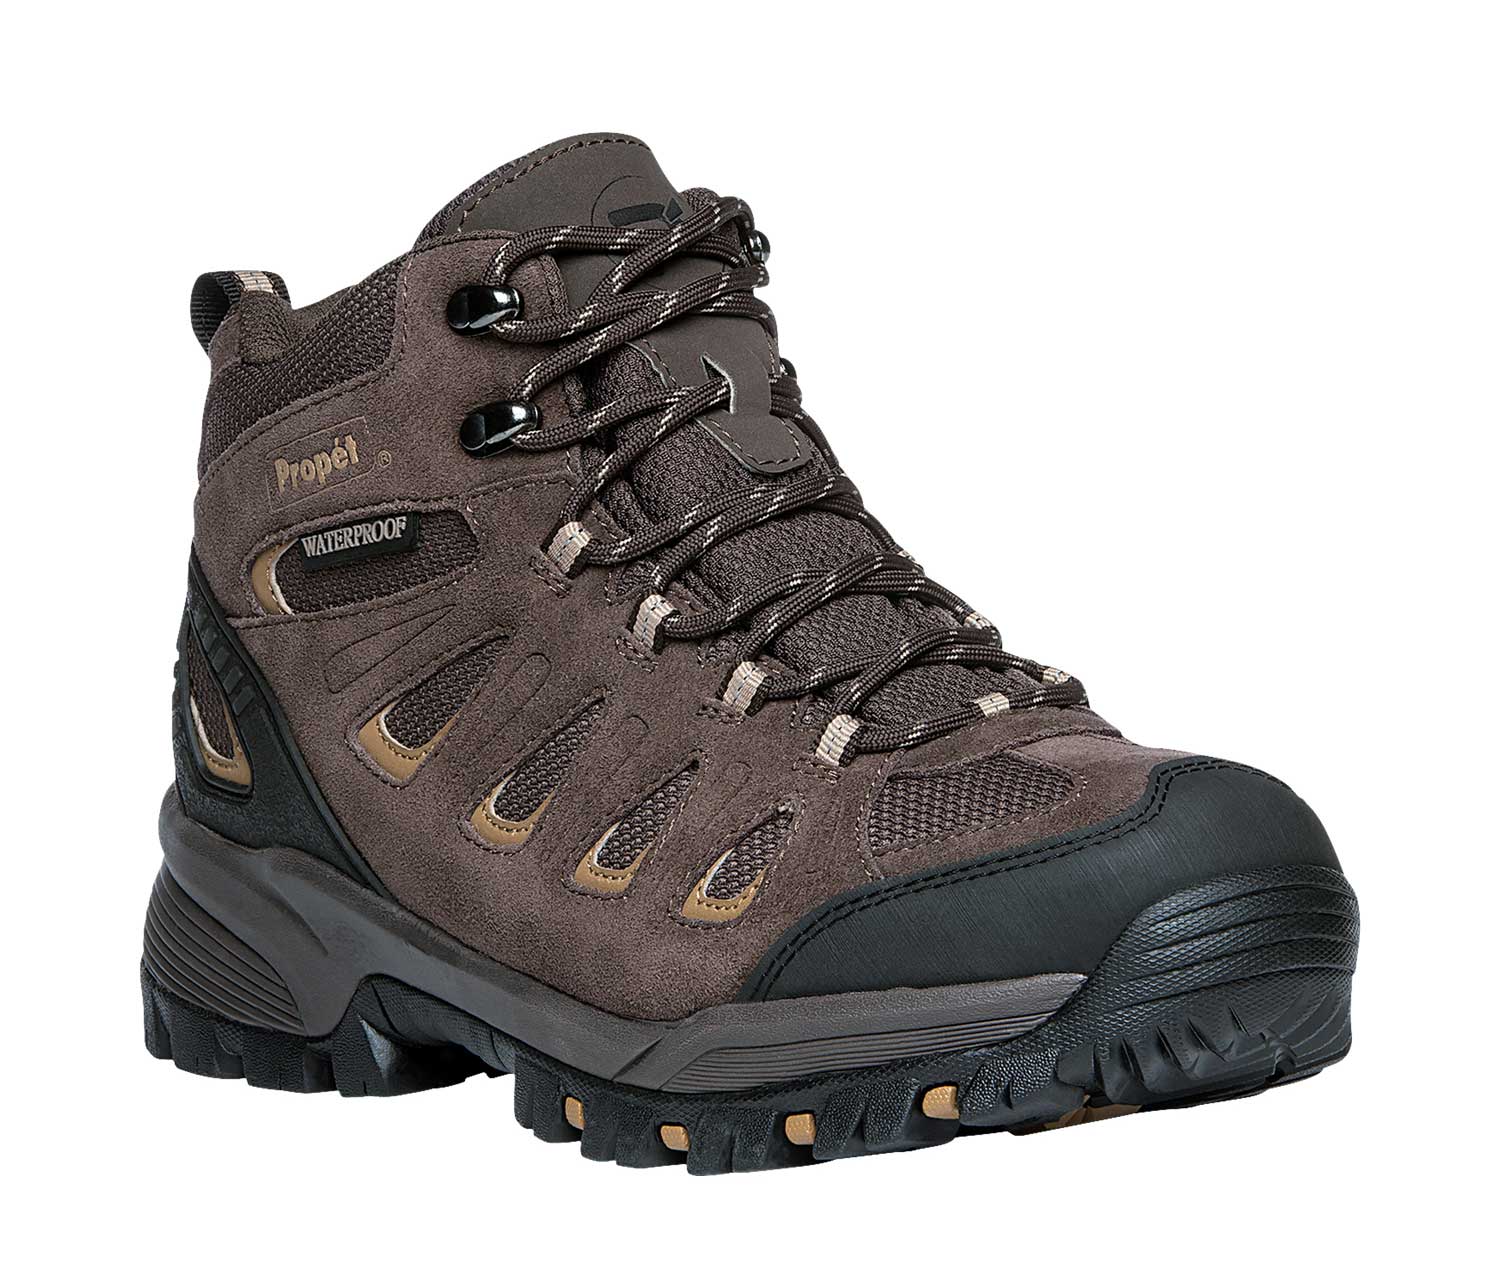 casual hiking boots